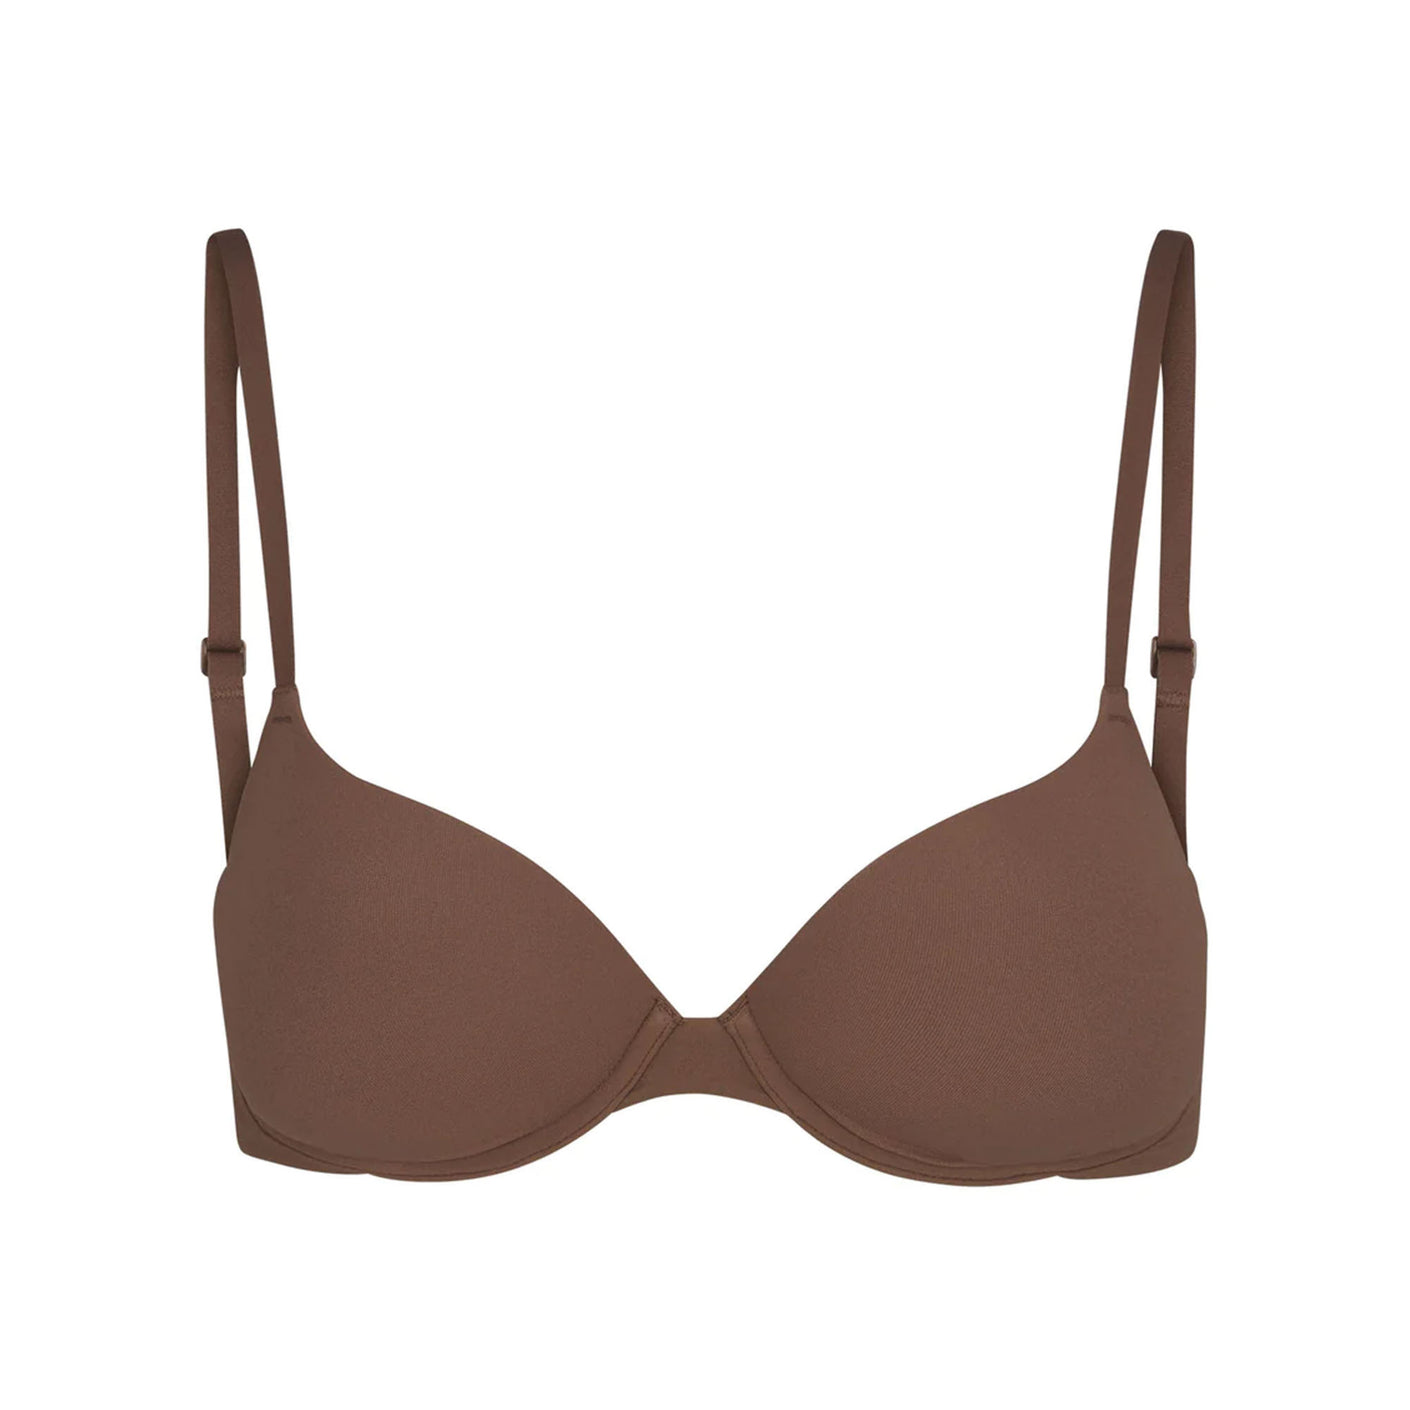 SKIMS - The T-Shirt Bra ($52) - extra comfort and support